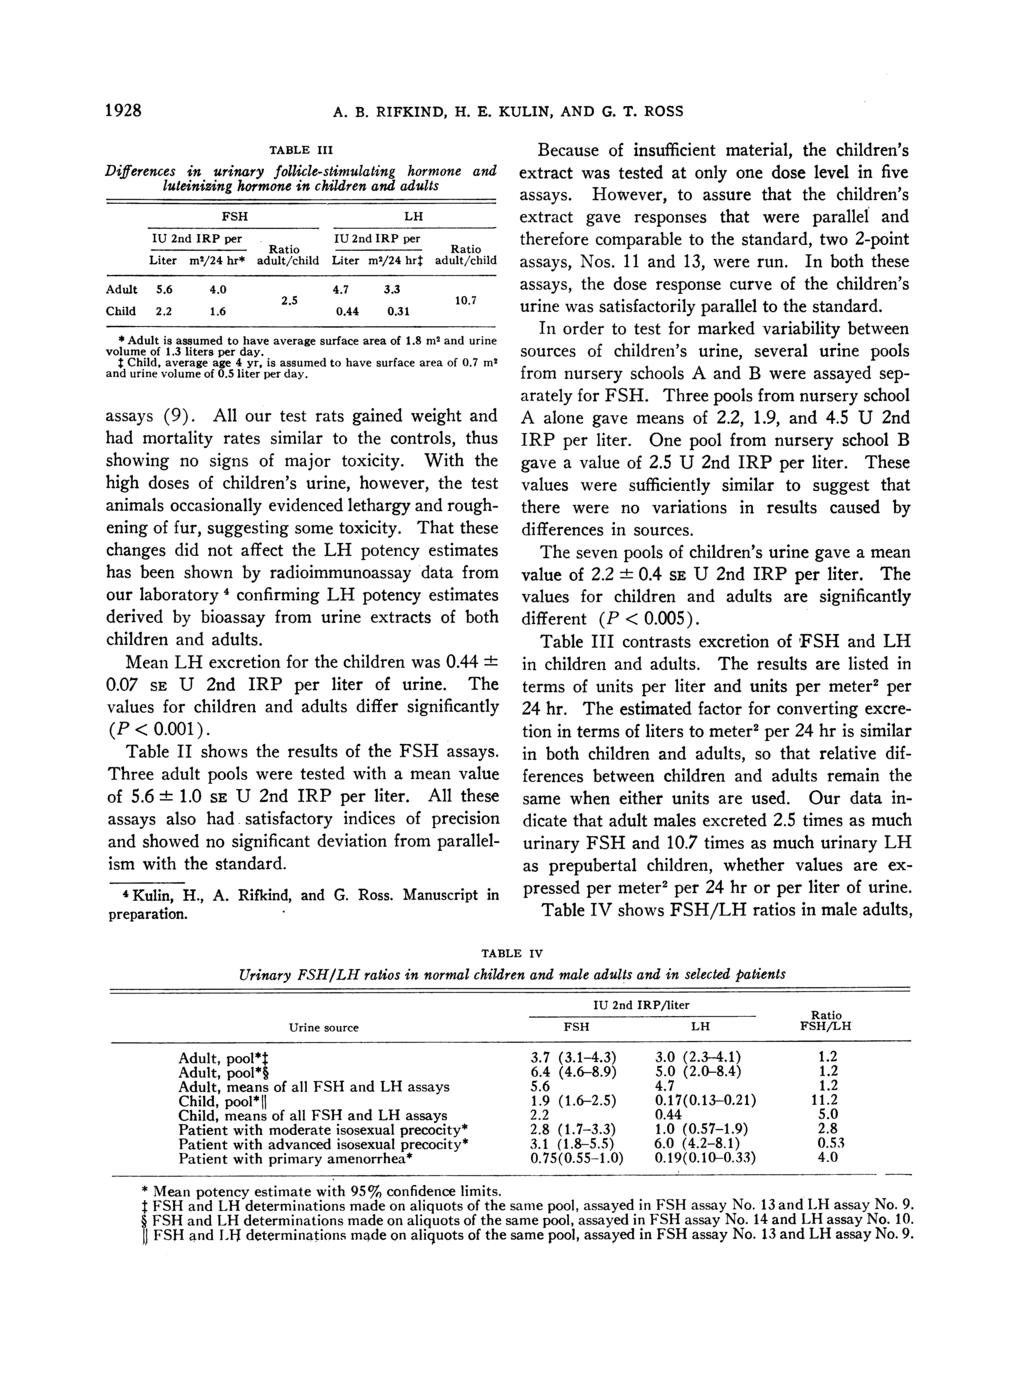 1928 TABLE III Differences in urinary follicle-stimulating hormone and luteinizing hormone in children and adults FSH A. B. RIFKIND, H. E. KULIN, AND G. T. ROSS LH IU 2nd IRP per IU 2nd IRP per - ~~~Ratio Ratio Liter m2/24 hr* adult/child Liter m2/24 hrl adult/child Adult 5.